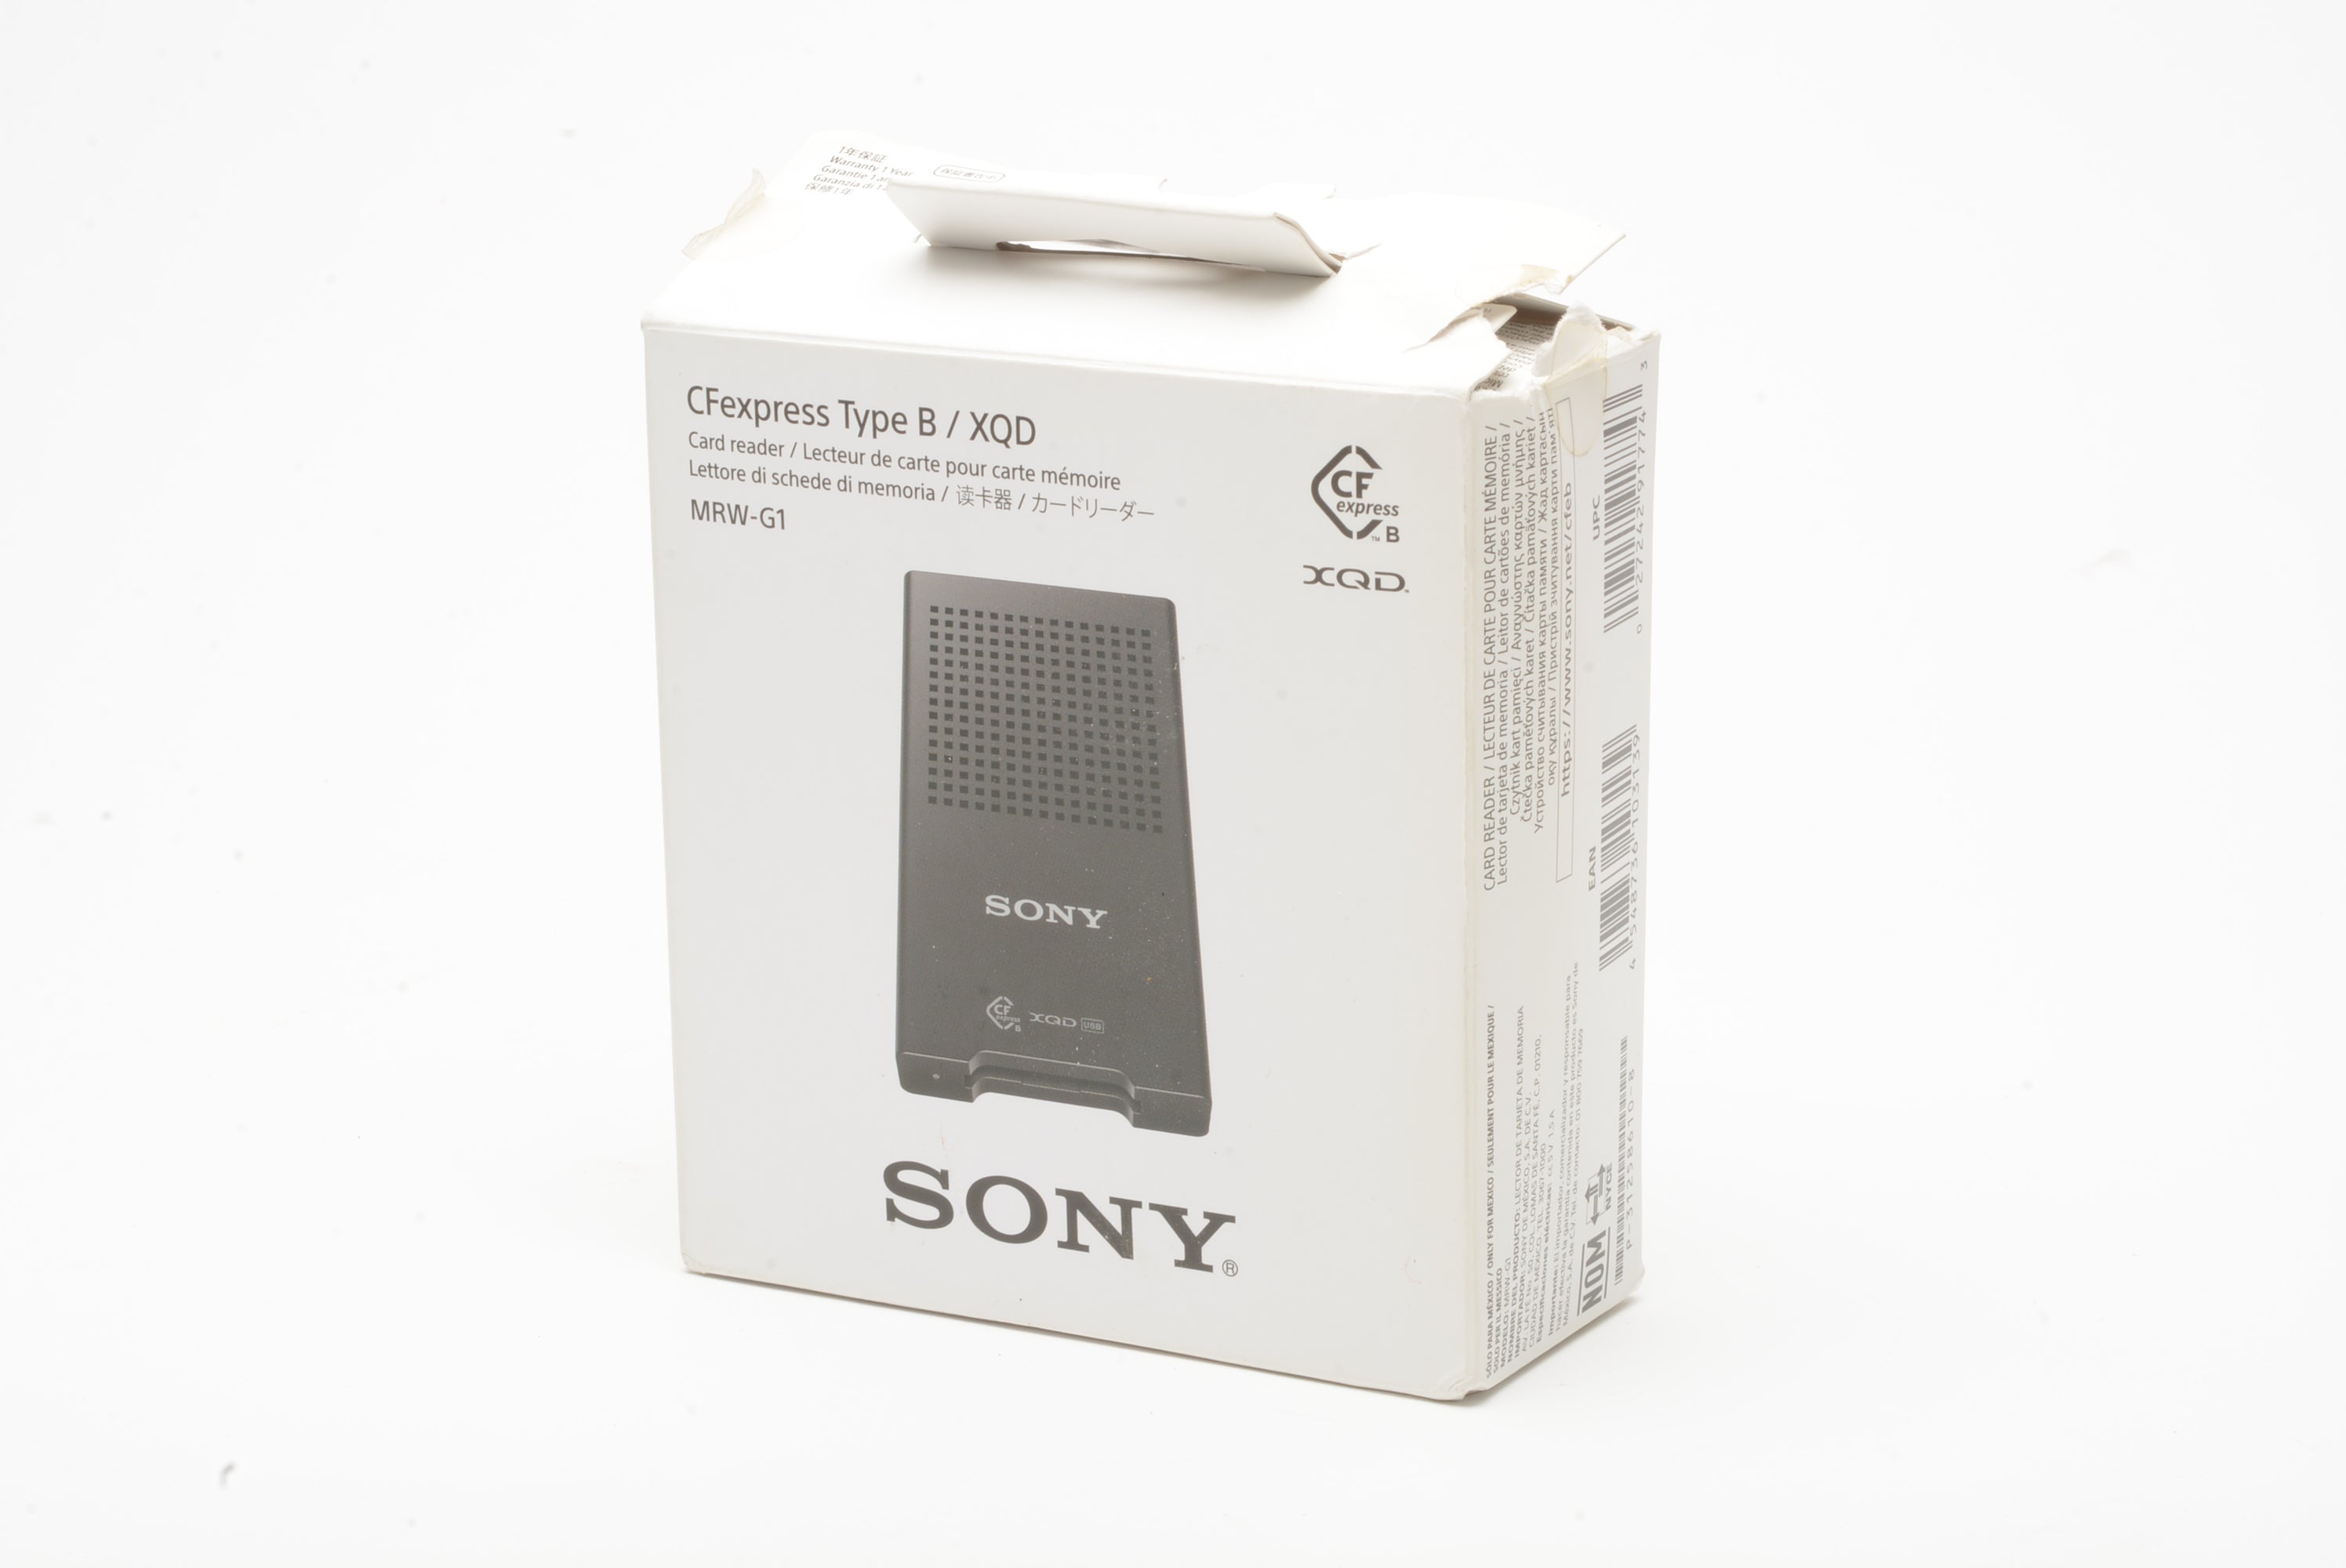 Sony MRW-G1 CF Express Type B / XQD memory card reader + cables (NEW)